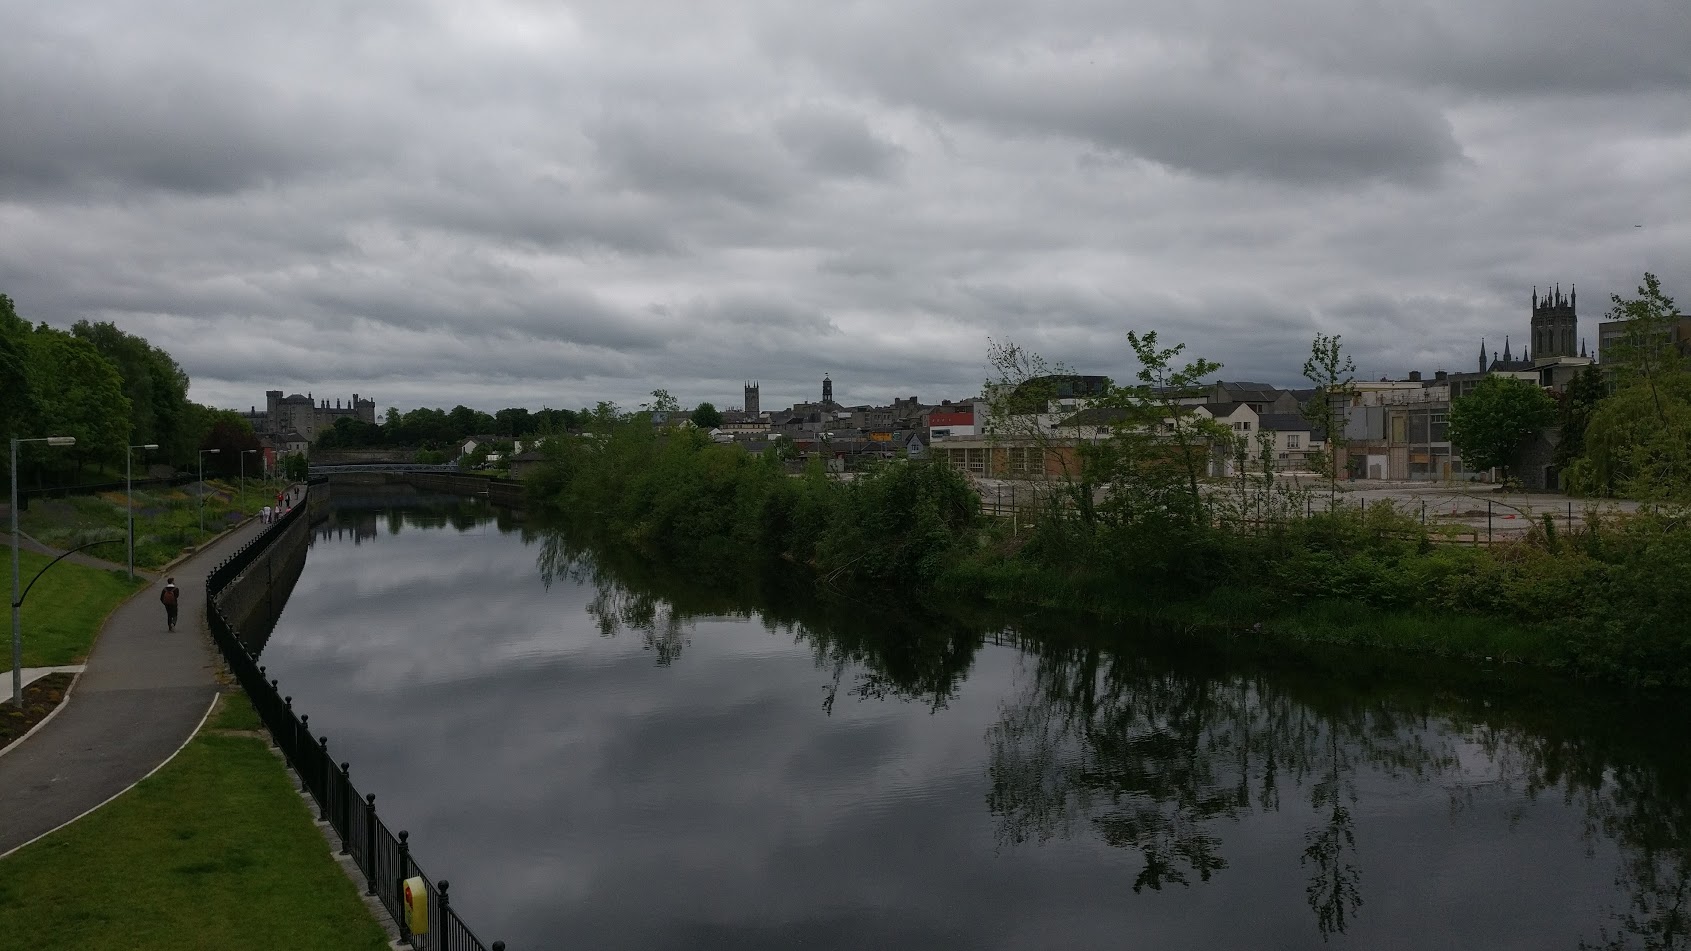 The view of the River Nore from St. Francis Bridge